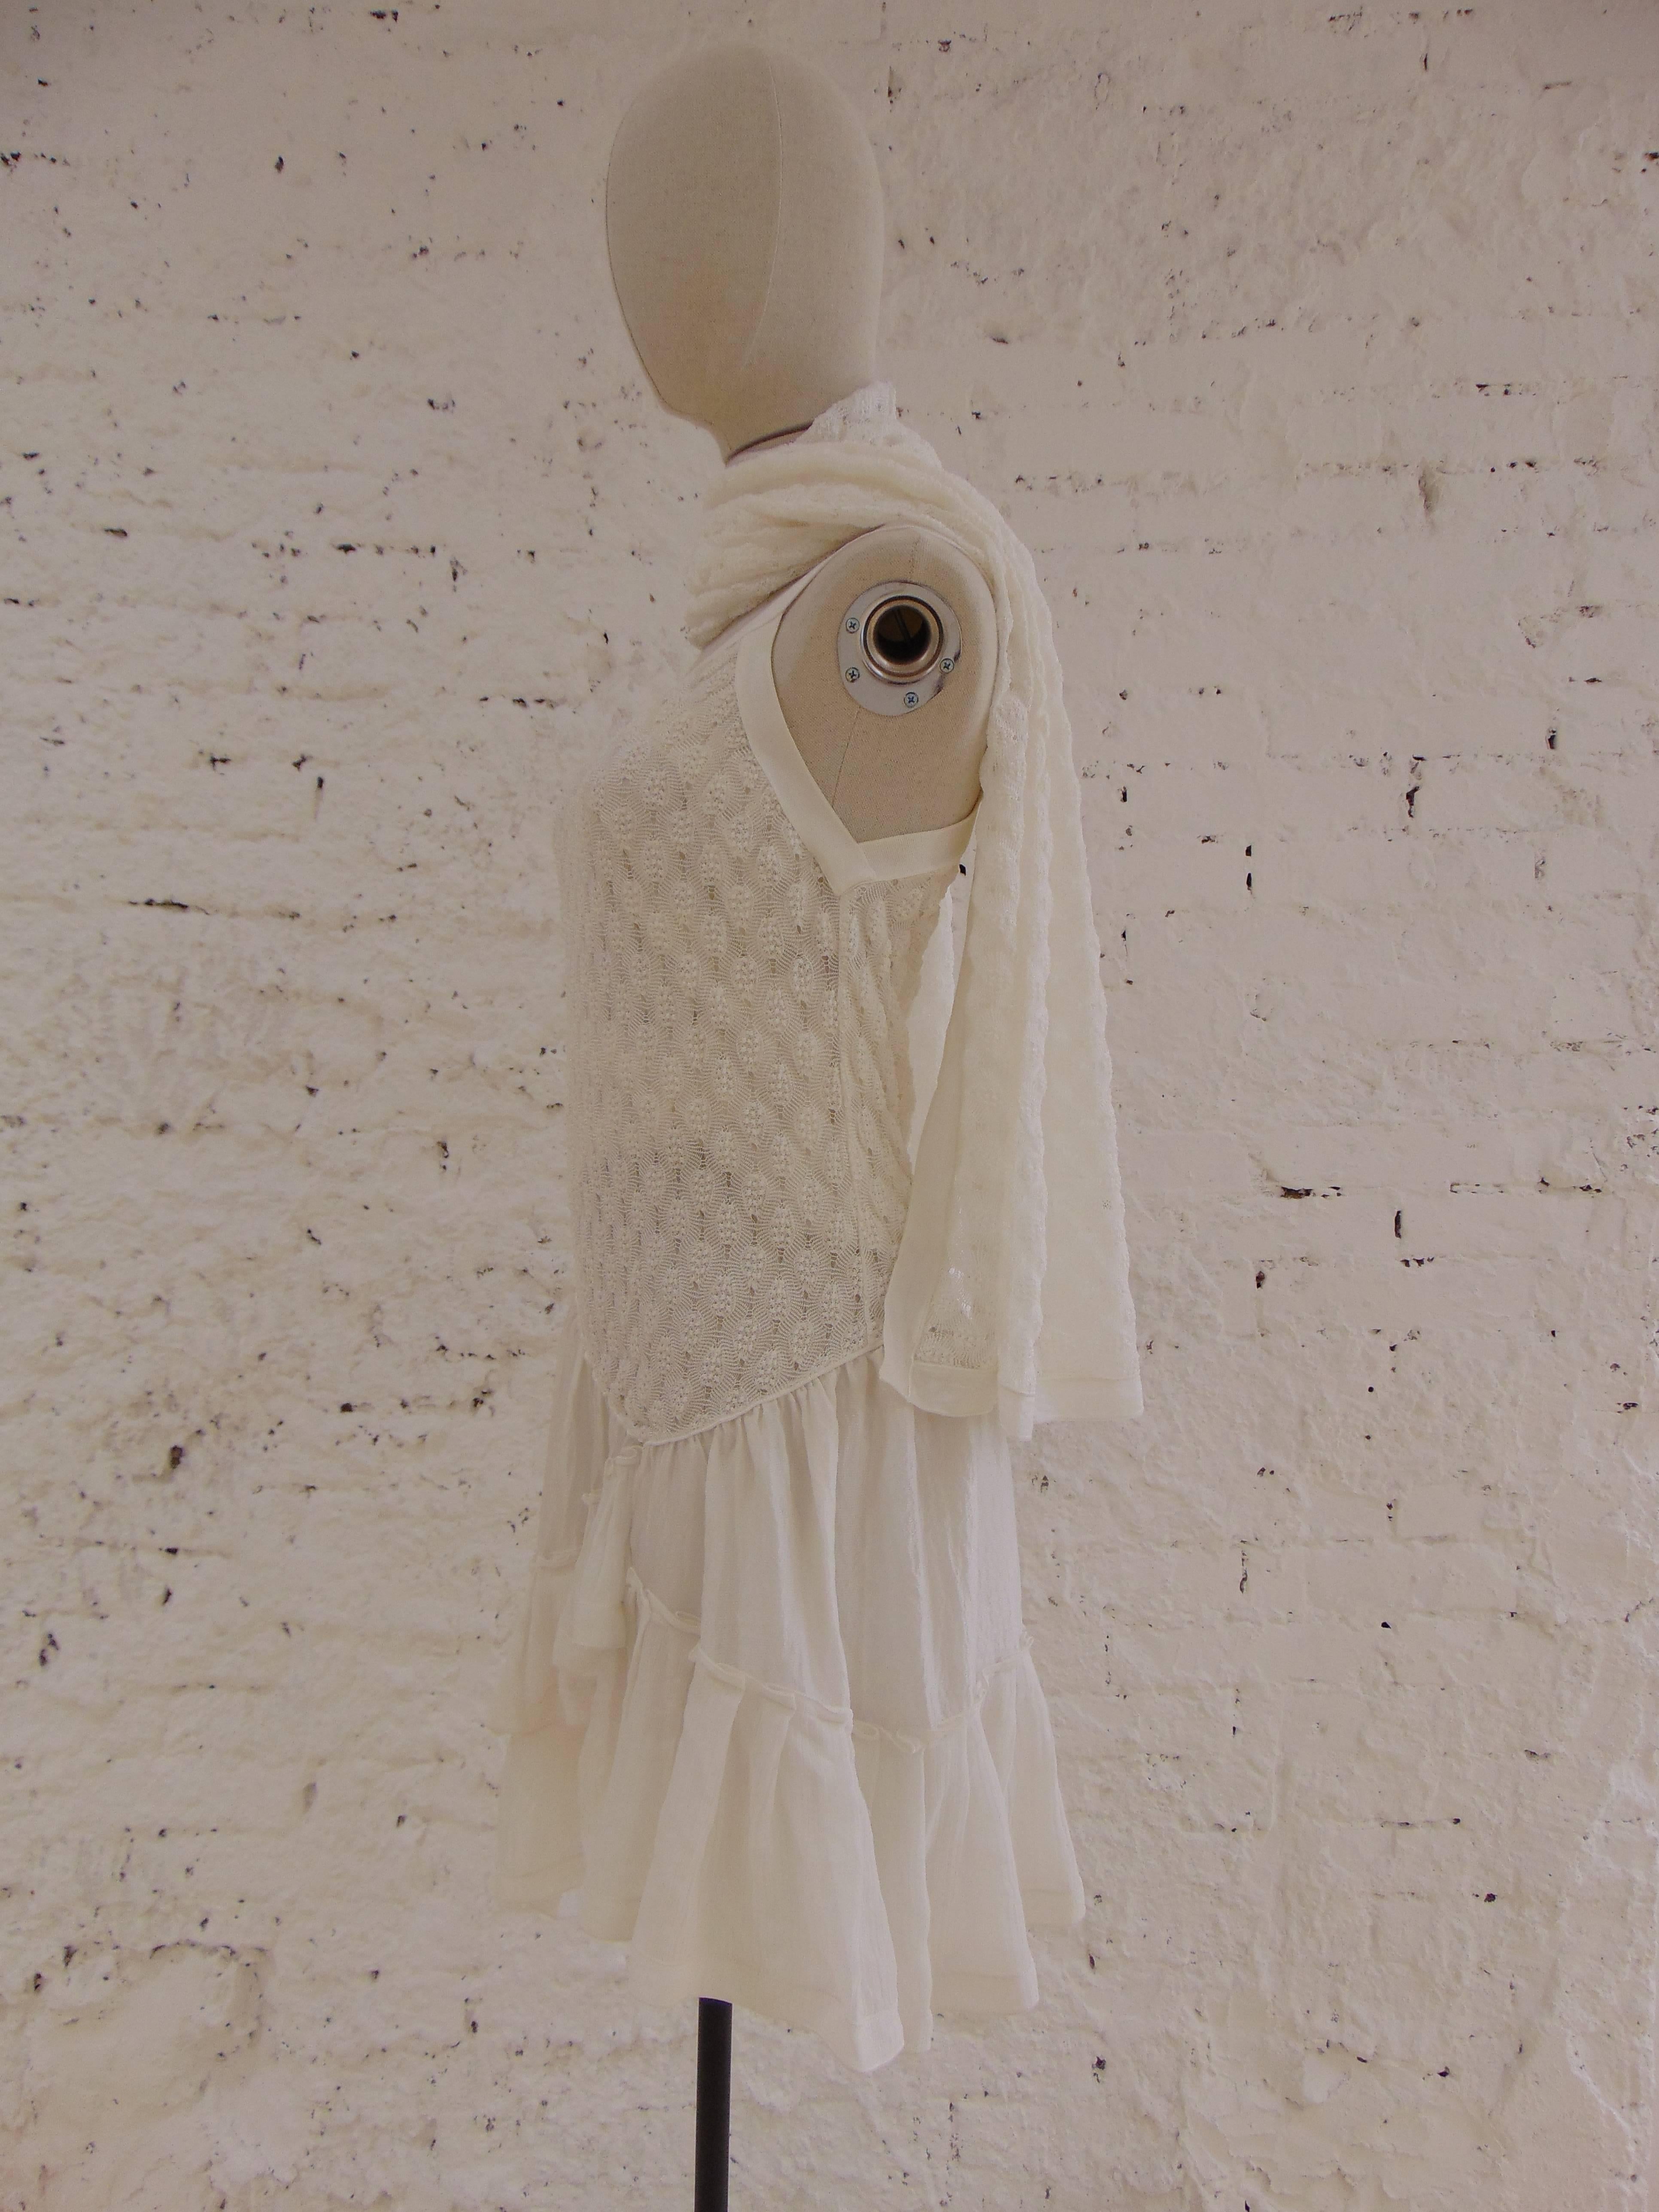 Missoni white dress plus Scarf

totally made in italy in size 42

white dress with white scarf totally in cotton